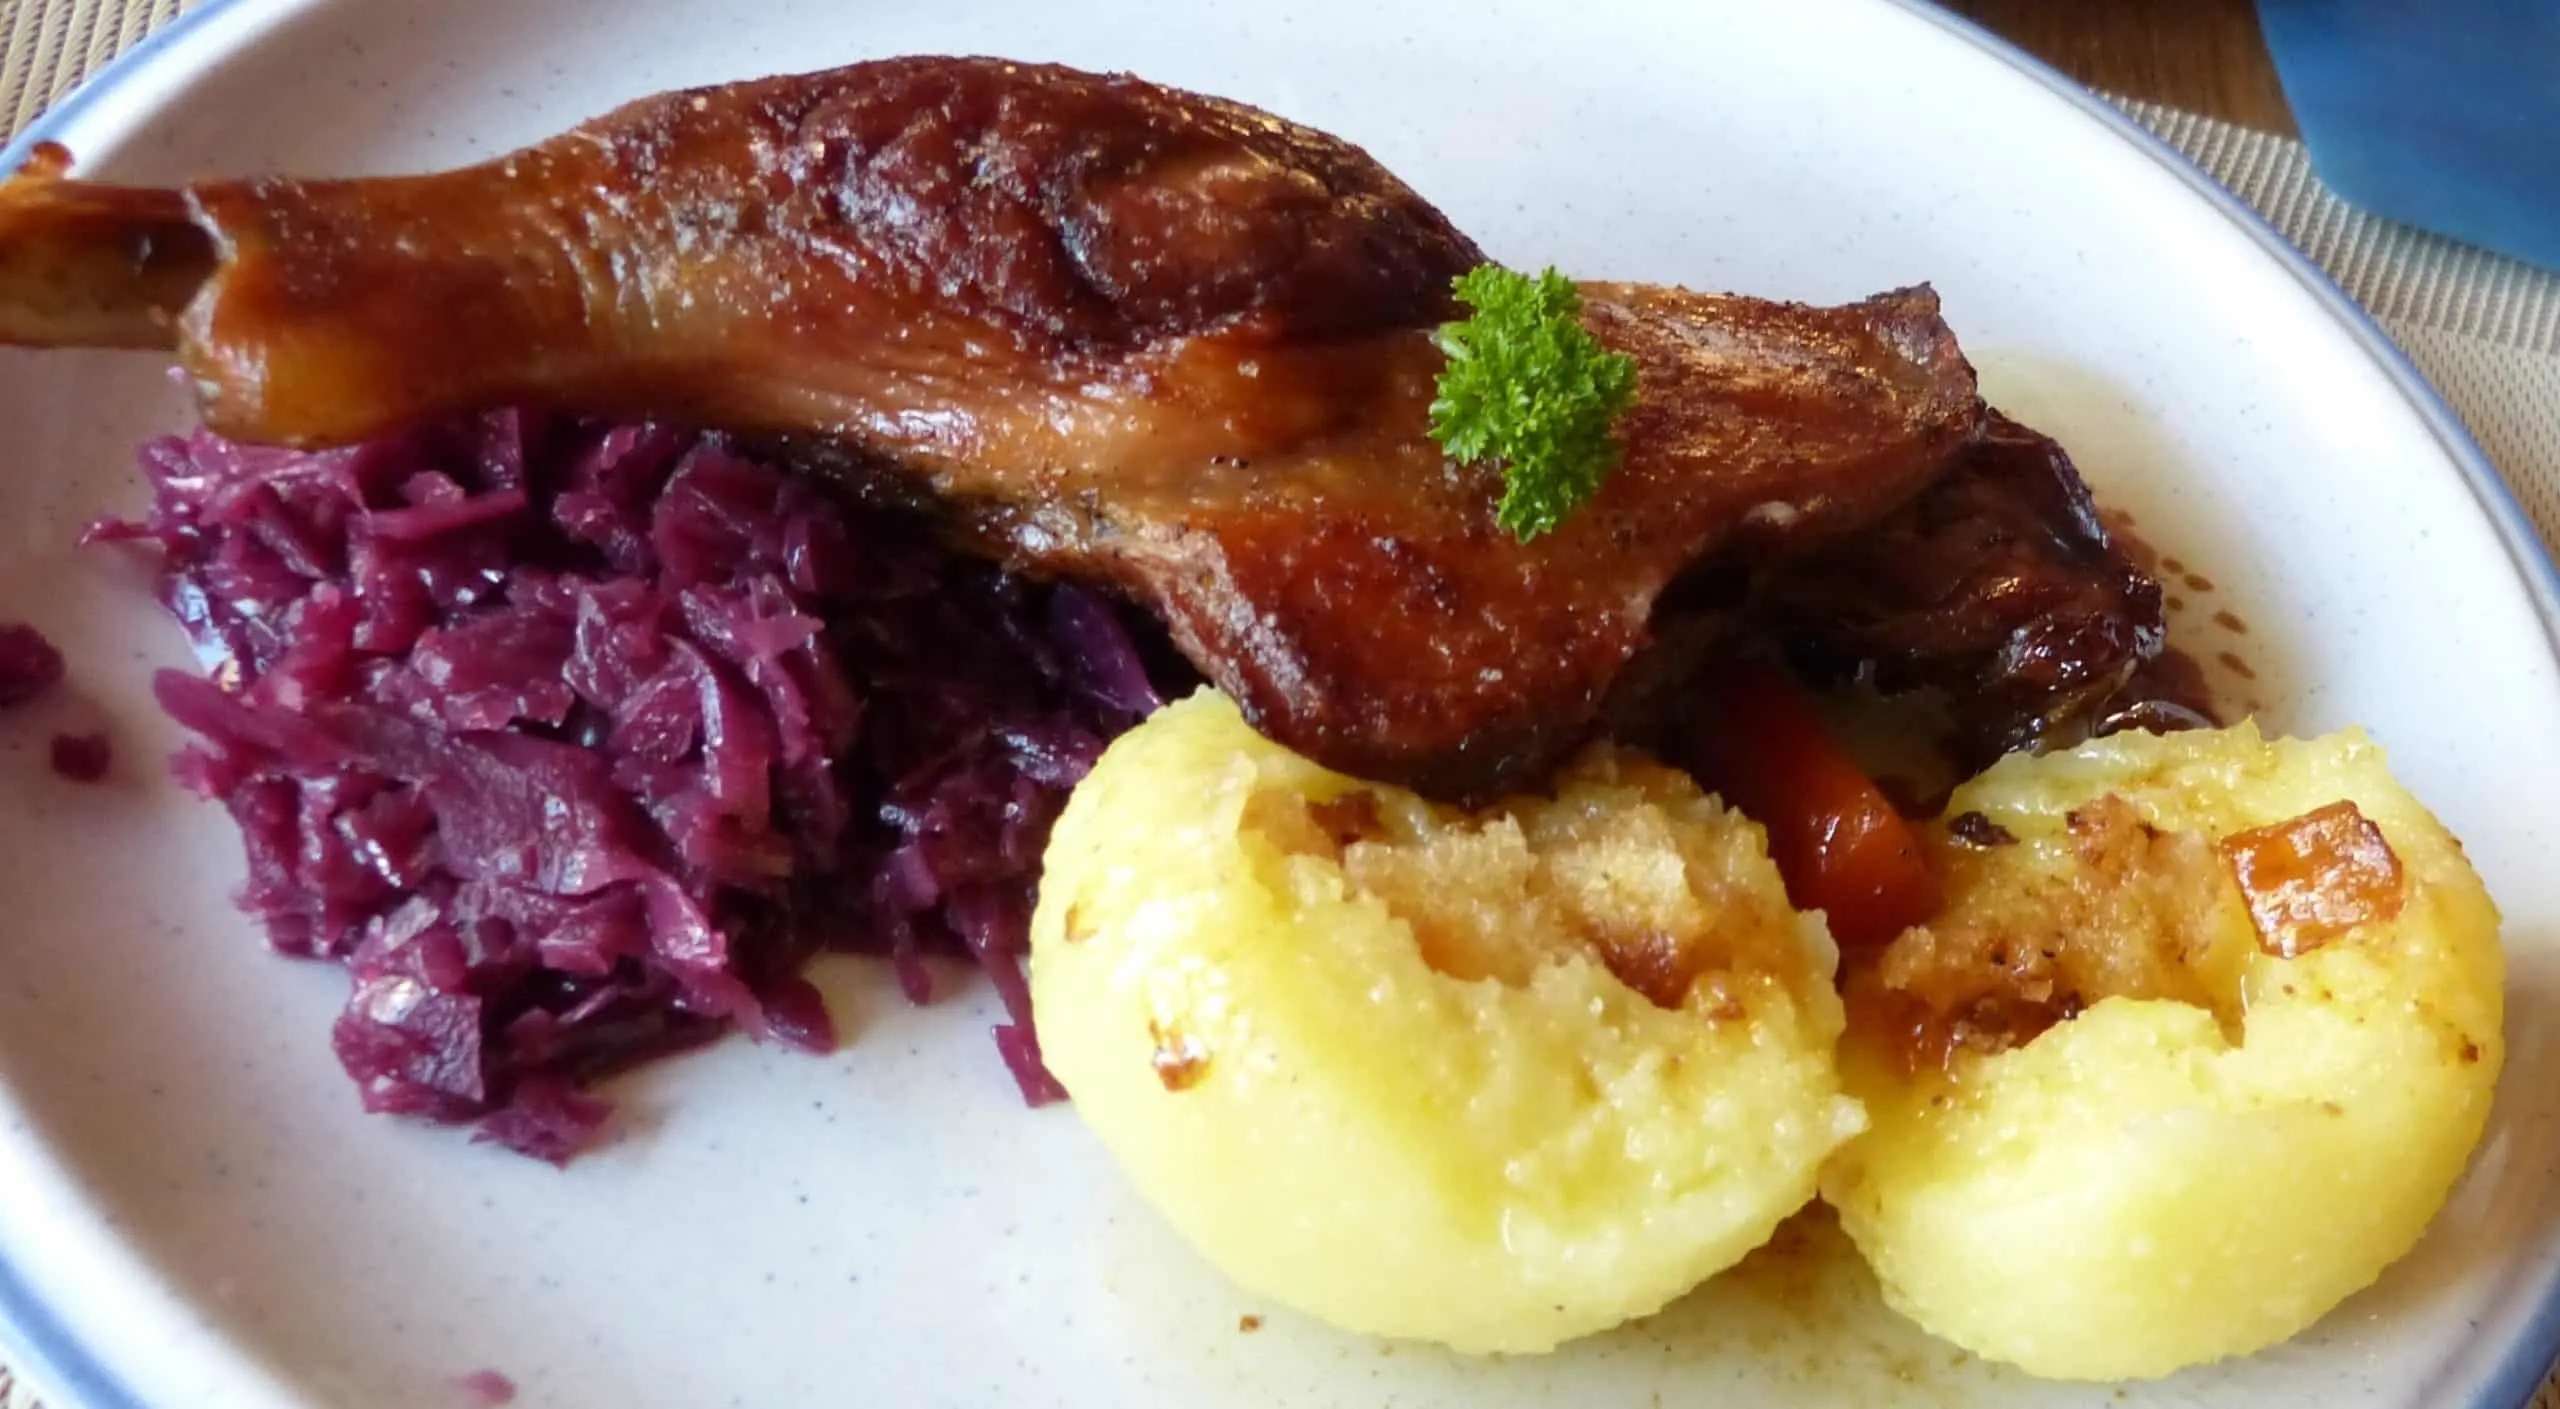 Nicely golden brown German roasted goose leg served on a plate with potato dumplings, rich gravy from the drippings, and blaukraut (red cabbage).